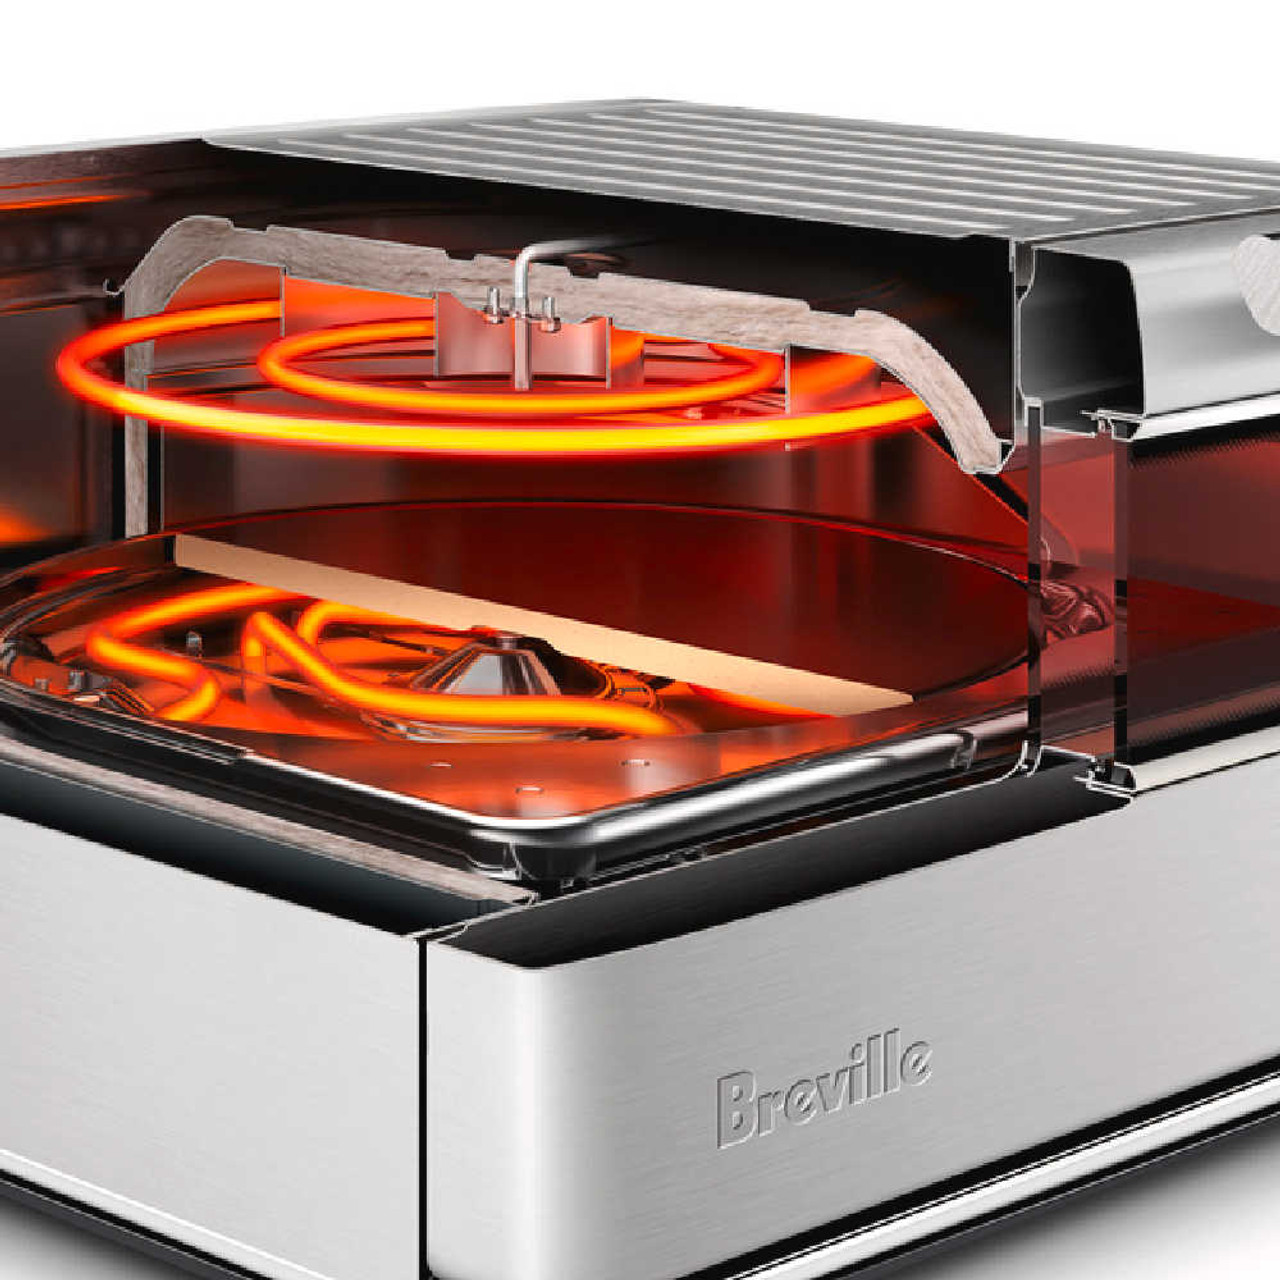 Breville Pizzaiolo Smart Pizza Oven - Reaches Temps Up To 750 Degrees